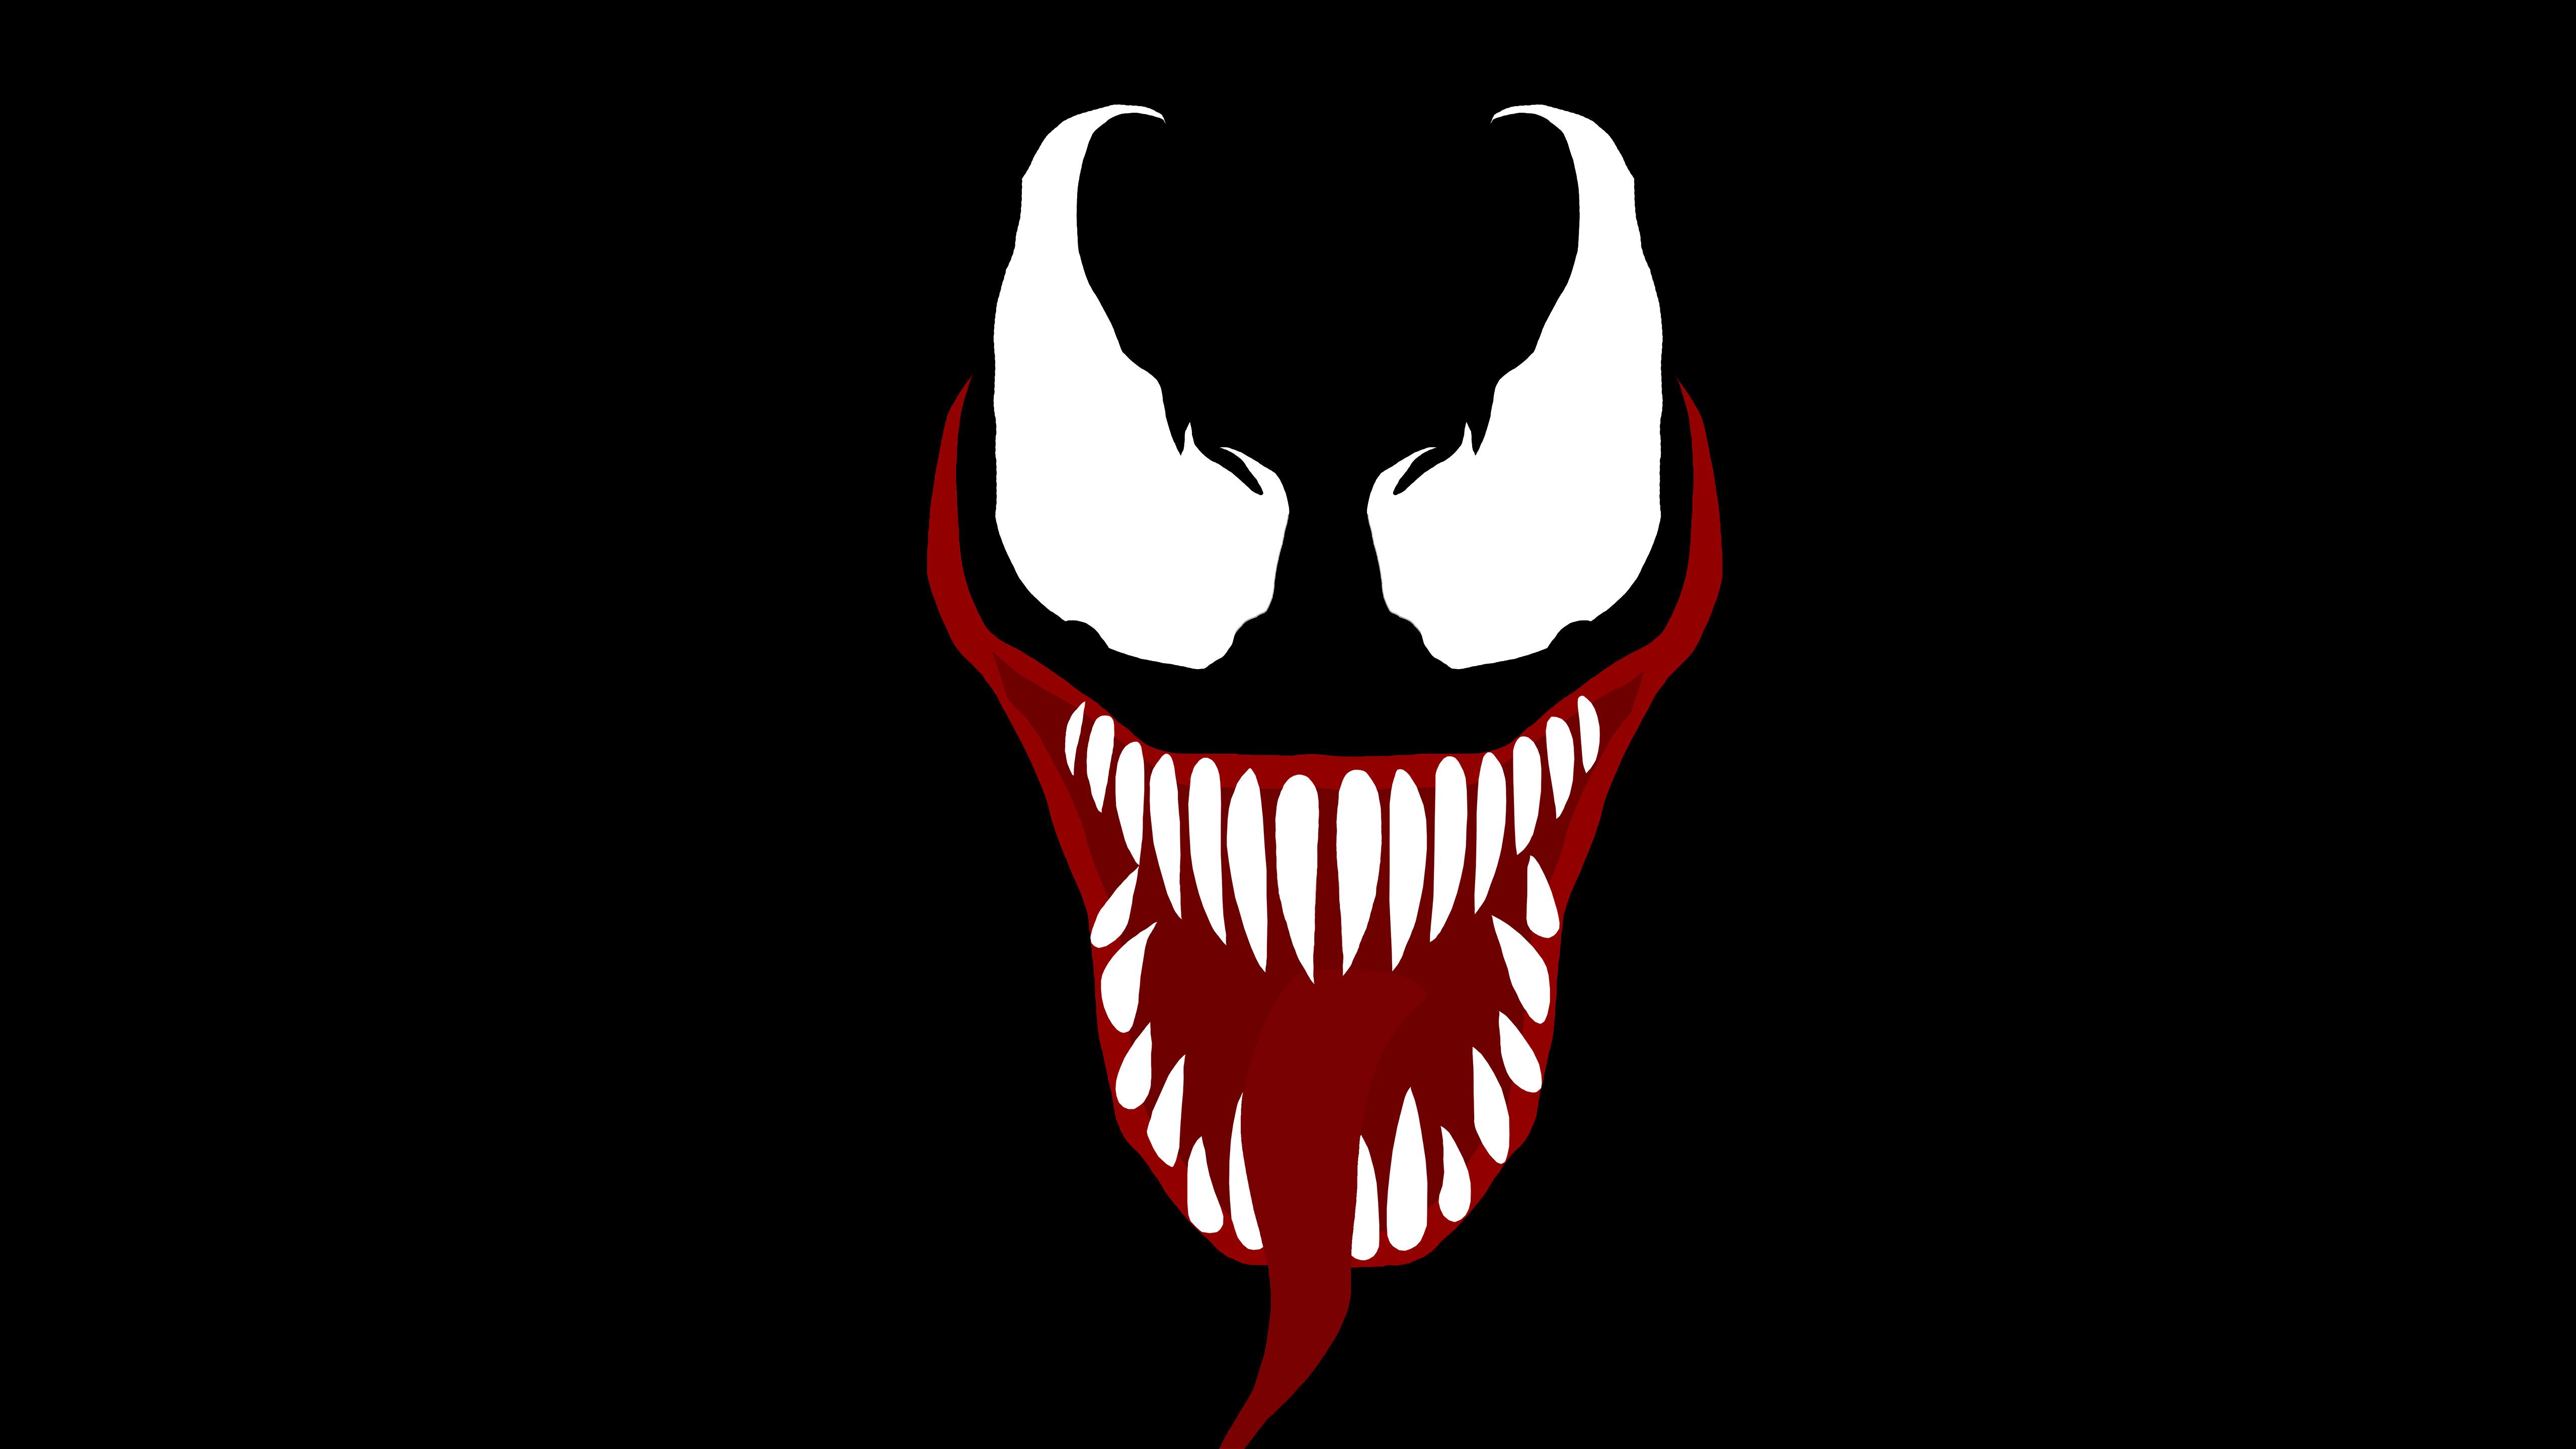 Venom Closeup Face Art HD Superheroes 4k Wallpapers Images Backgrounds  Photos and Pictures